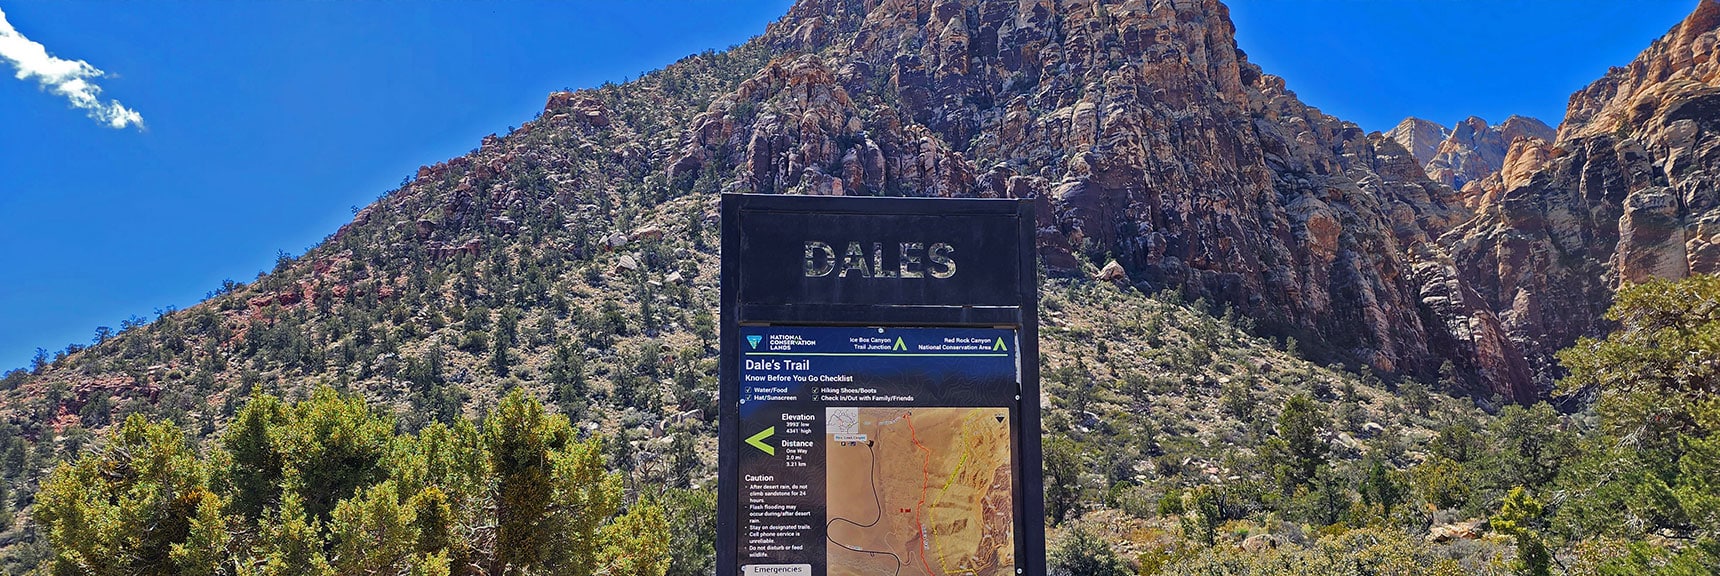 Northern Dales Trailhead on Ice Box Canyon Trail | Dales Trail | Red Rock Canyon National Conservation Area, Nevada | David Smith | LasVegasAreaTrails.com